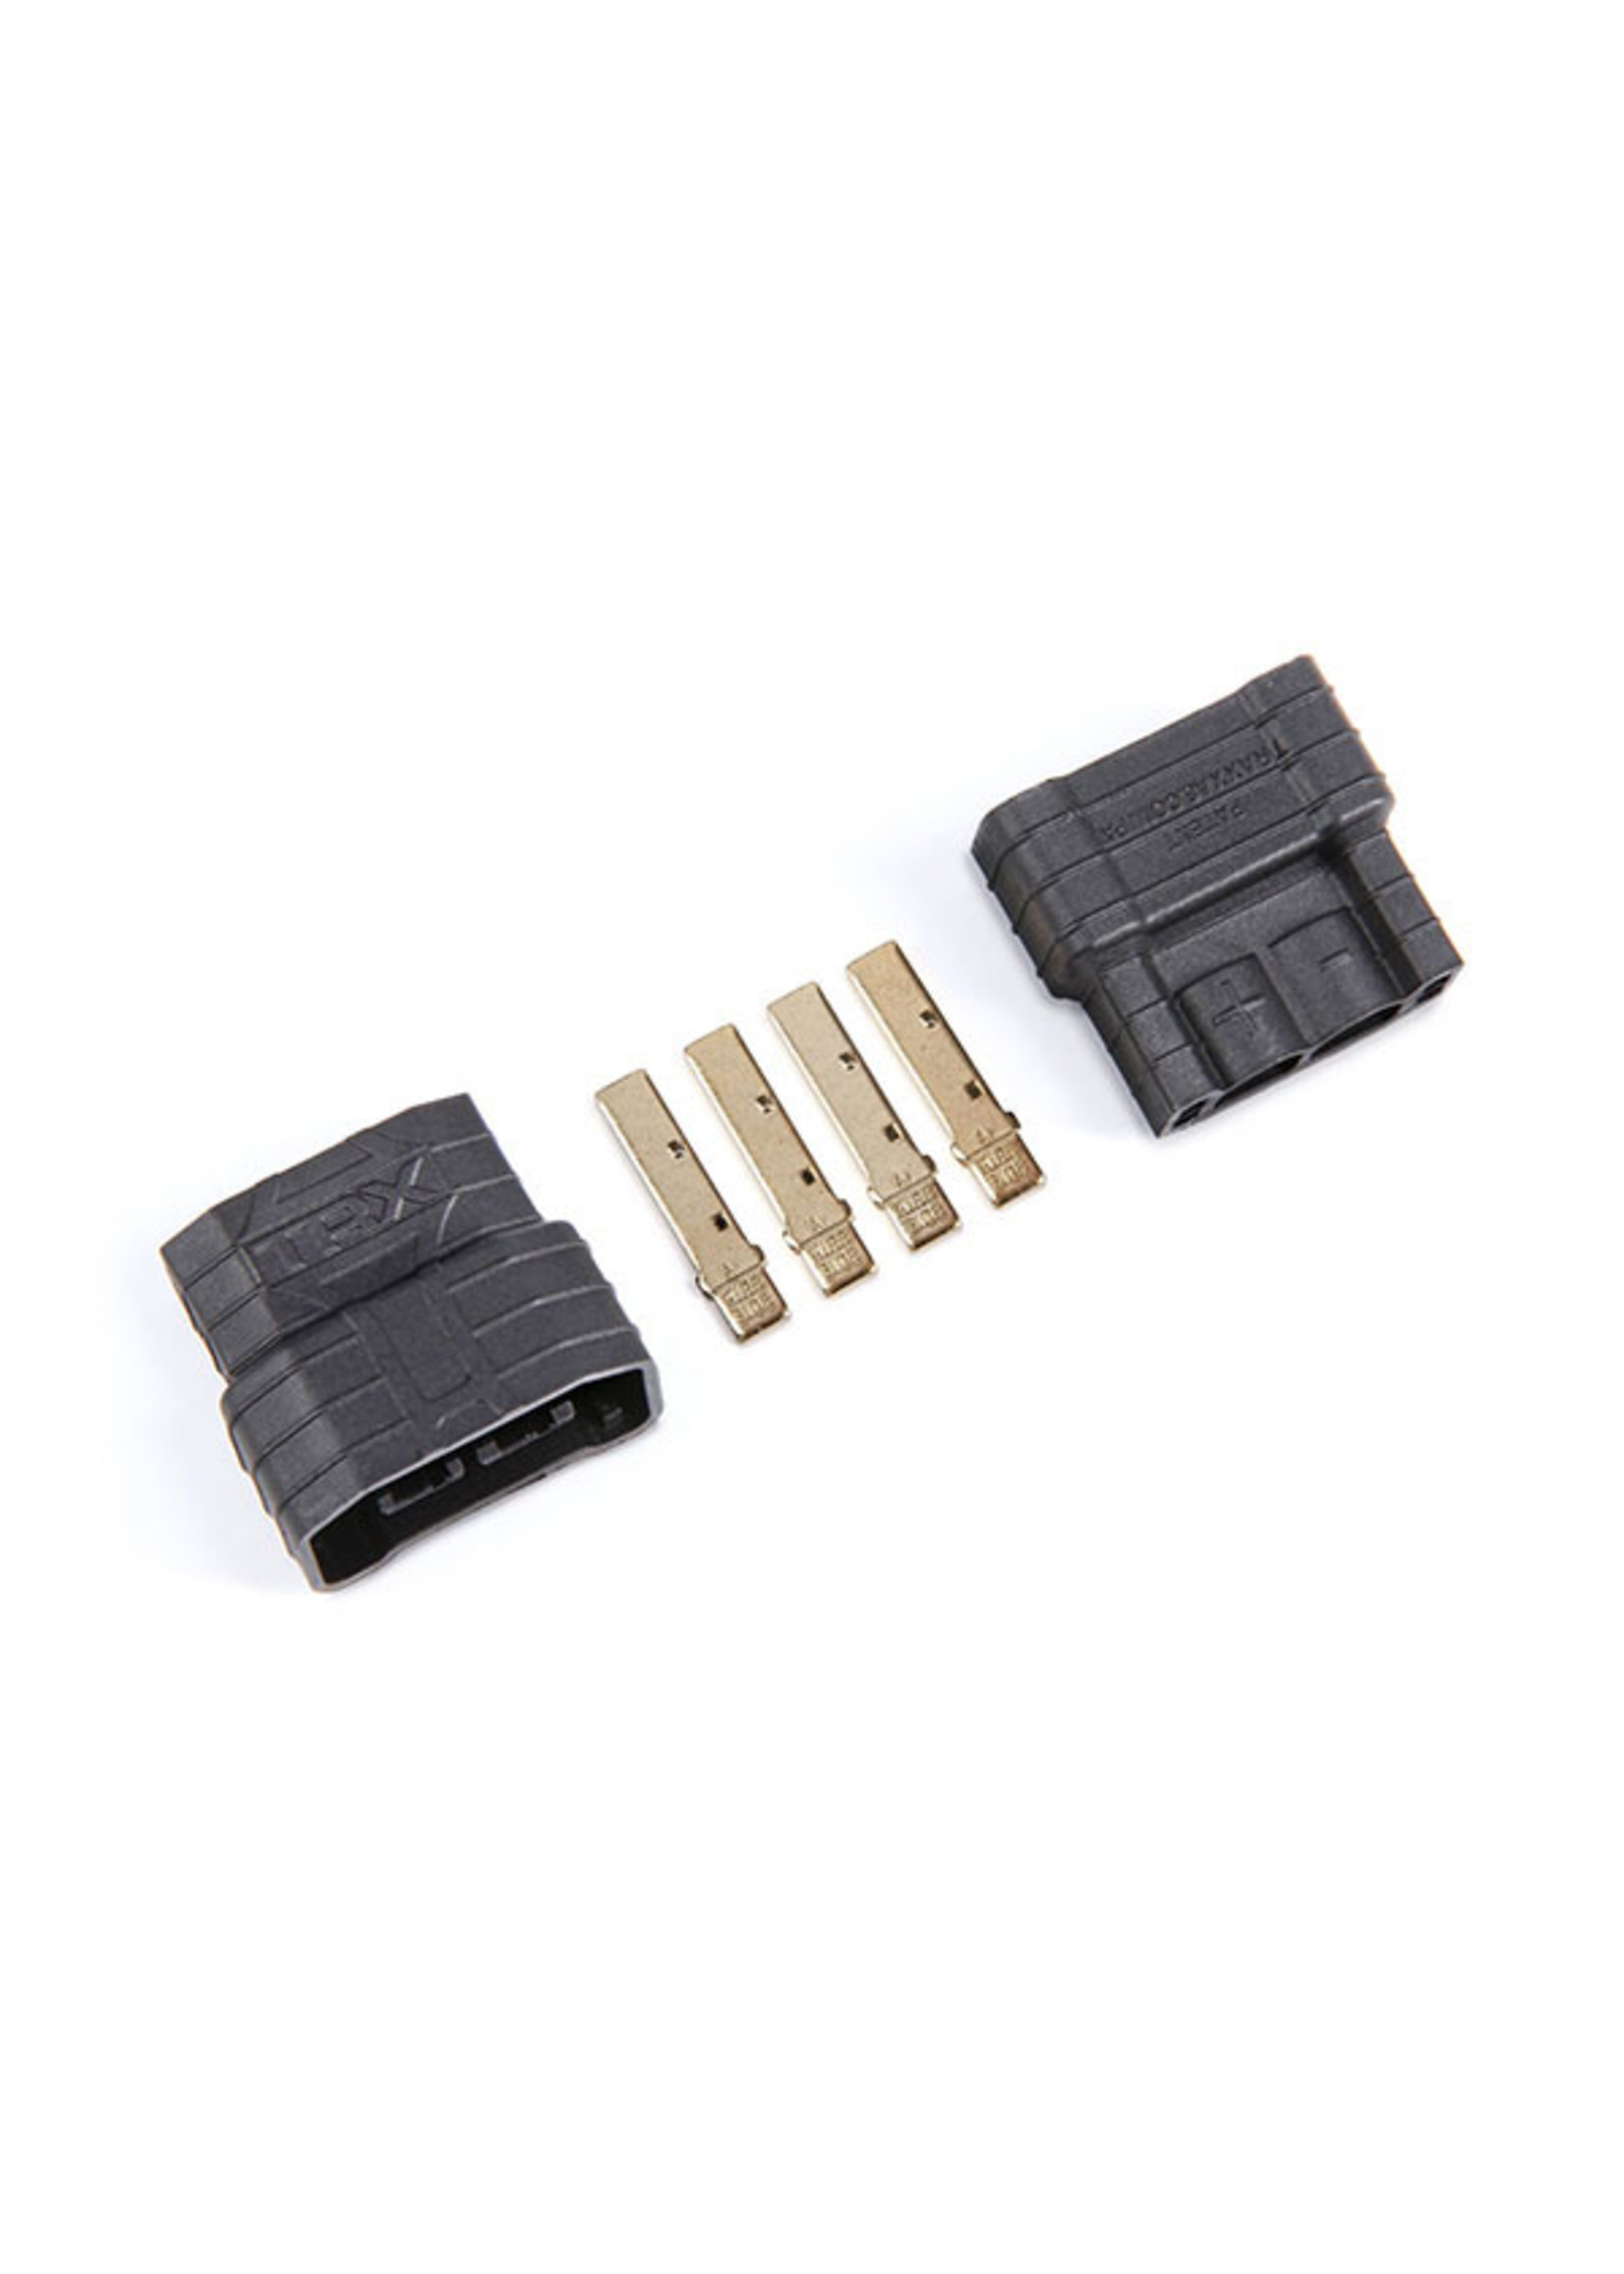 Traxxas 3070R - 4S Male Connector - ESC Use Only